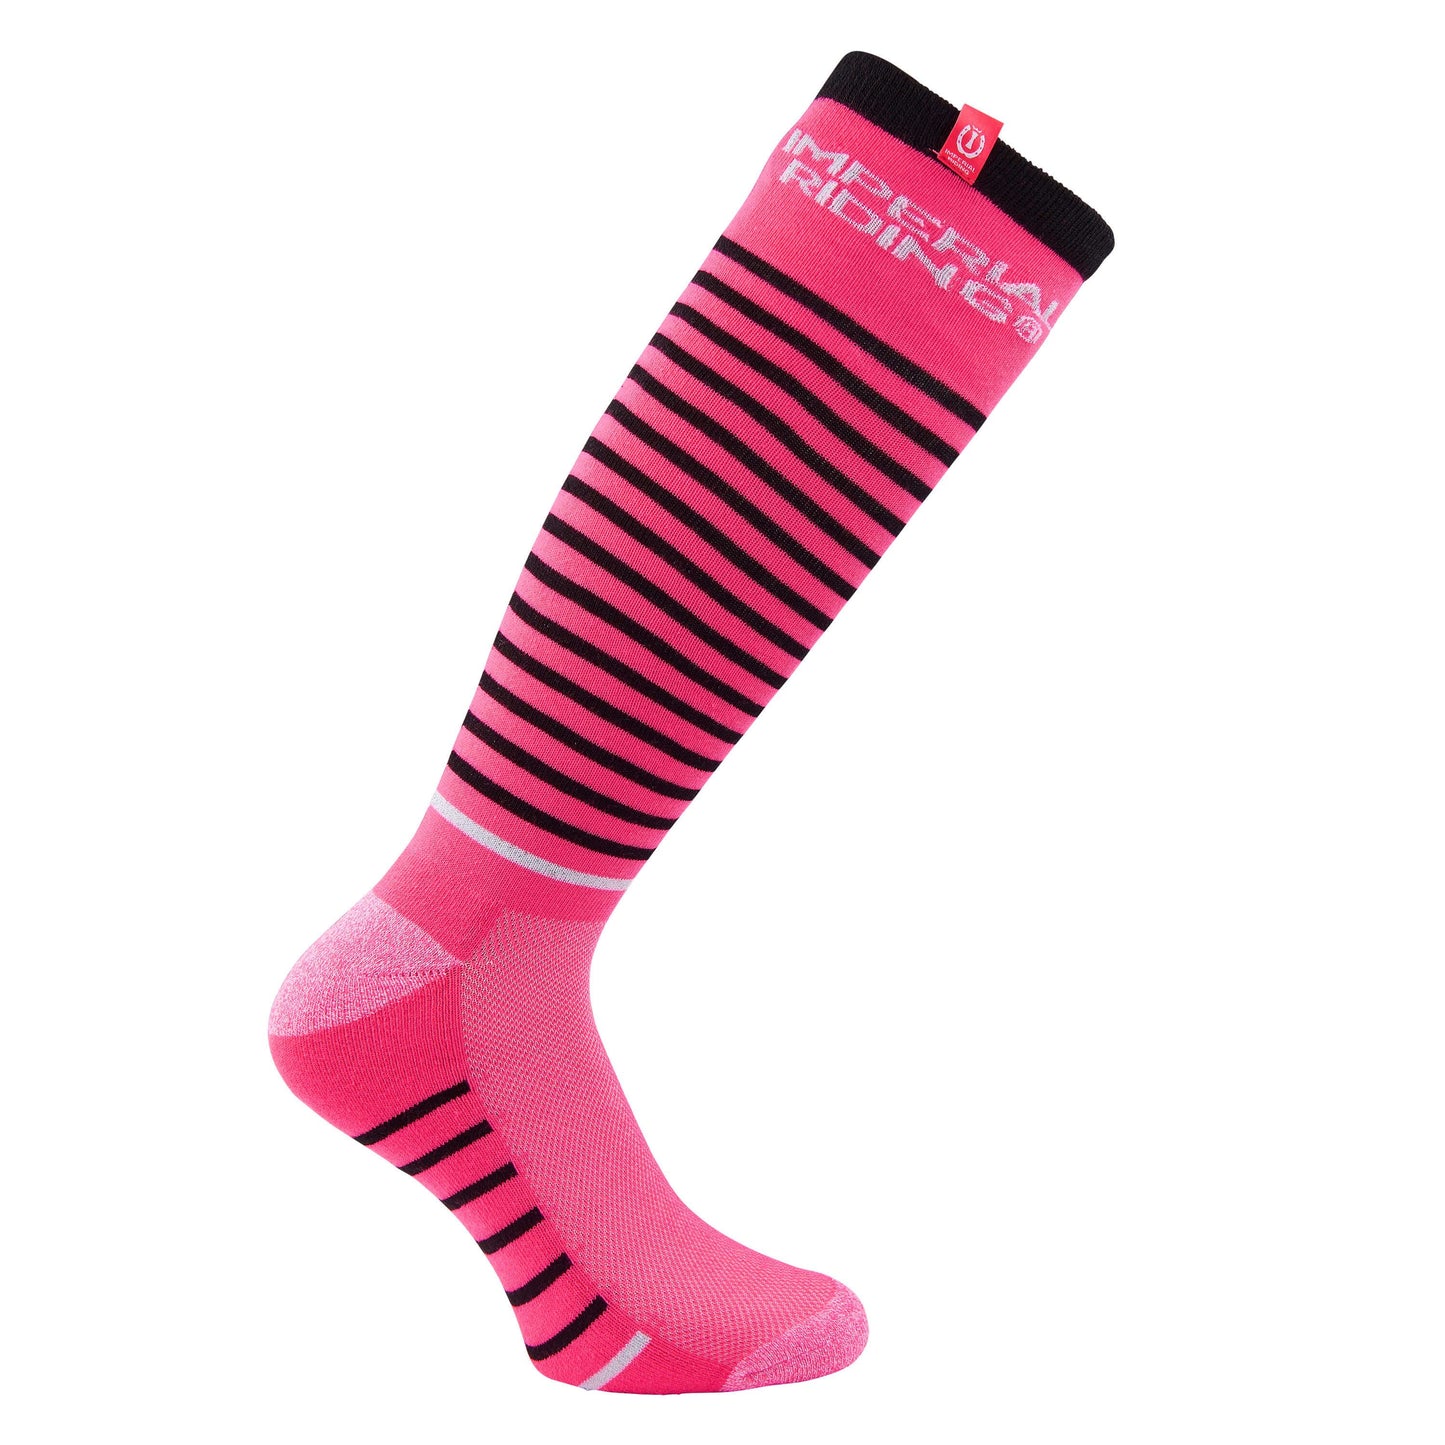 Imperial Riding Diva Pink Up In Space Riding Socks